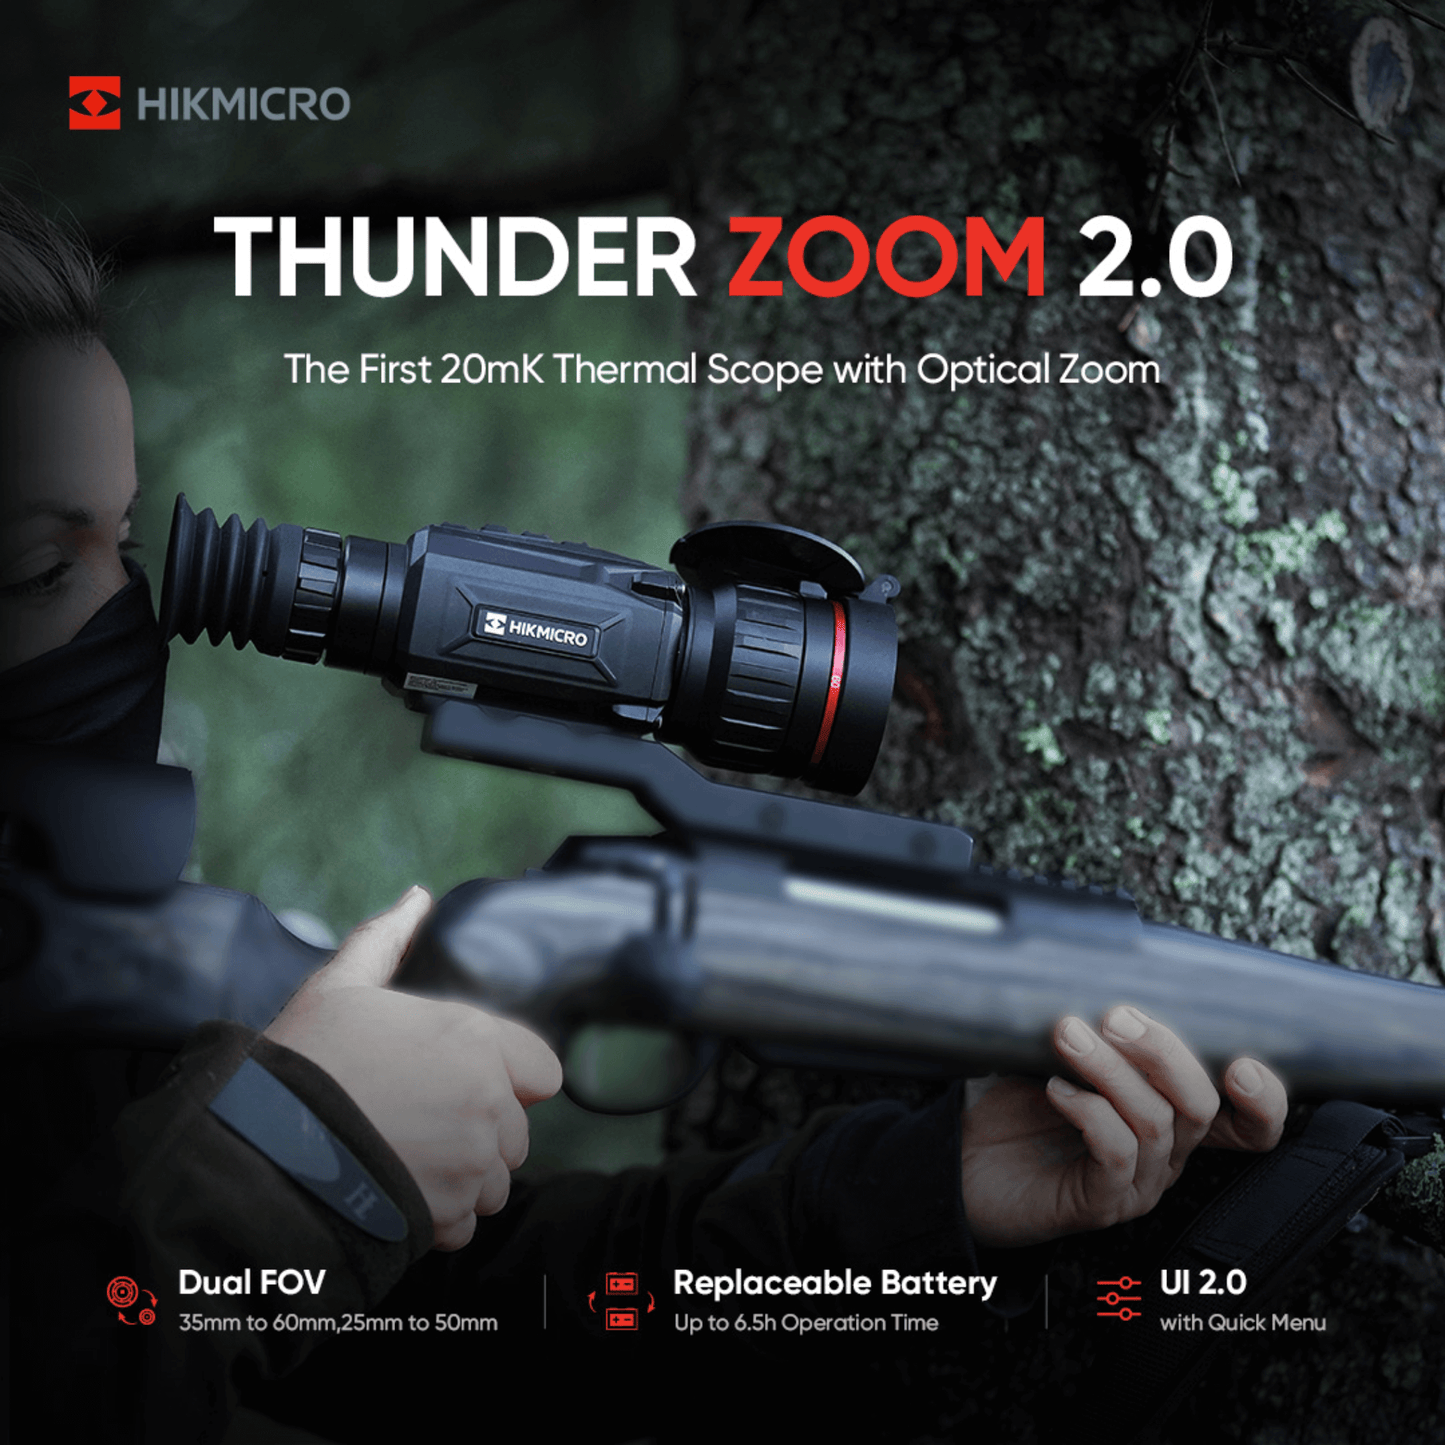 HikMicro Thunder Zoom TQ60Z 2.0 Is the first 20mK Thermal Rifle Scope with optical zoom